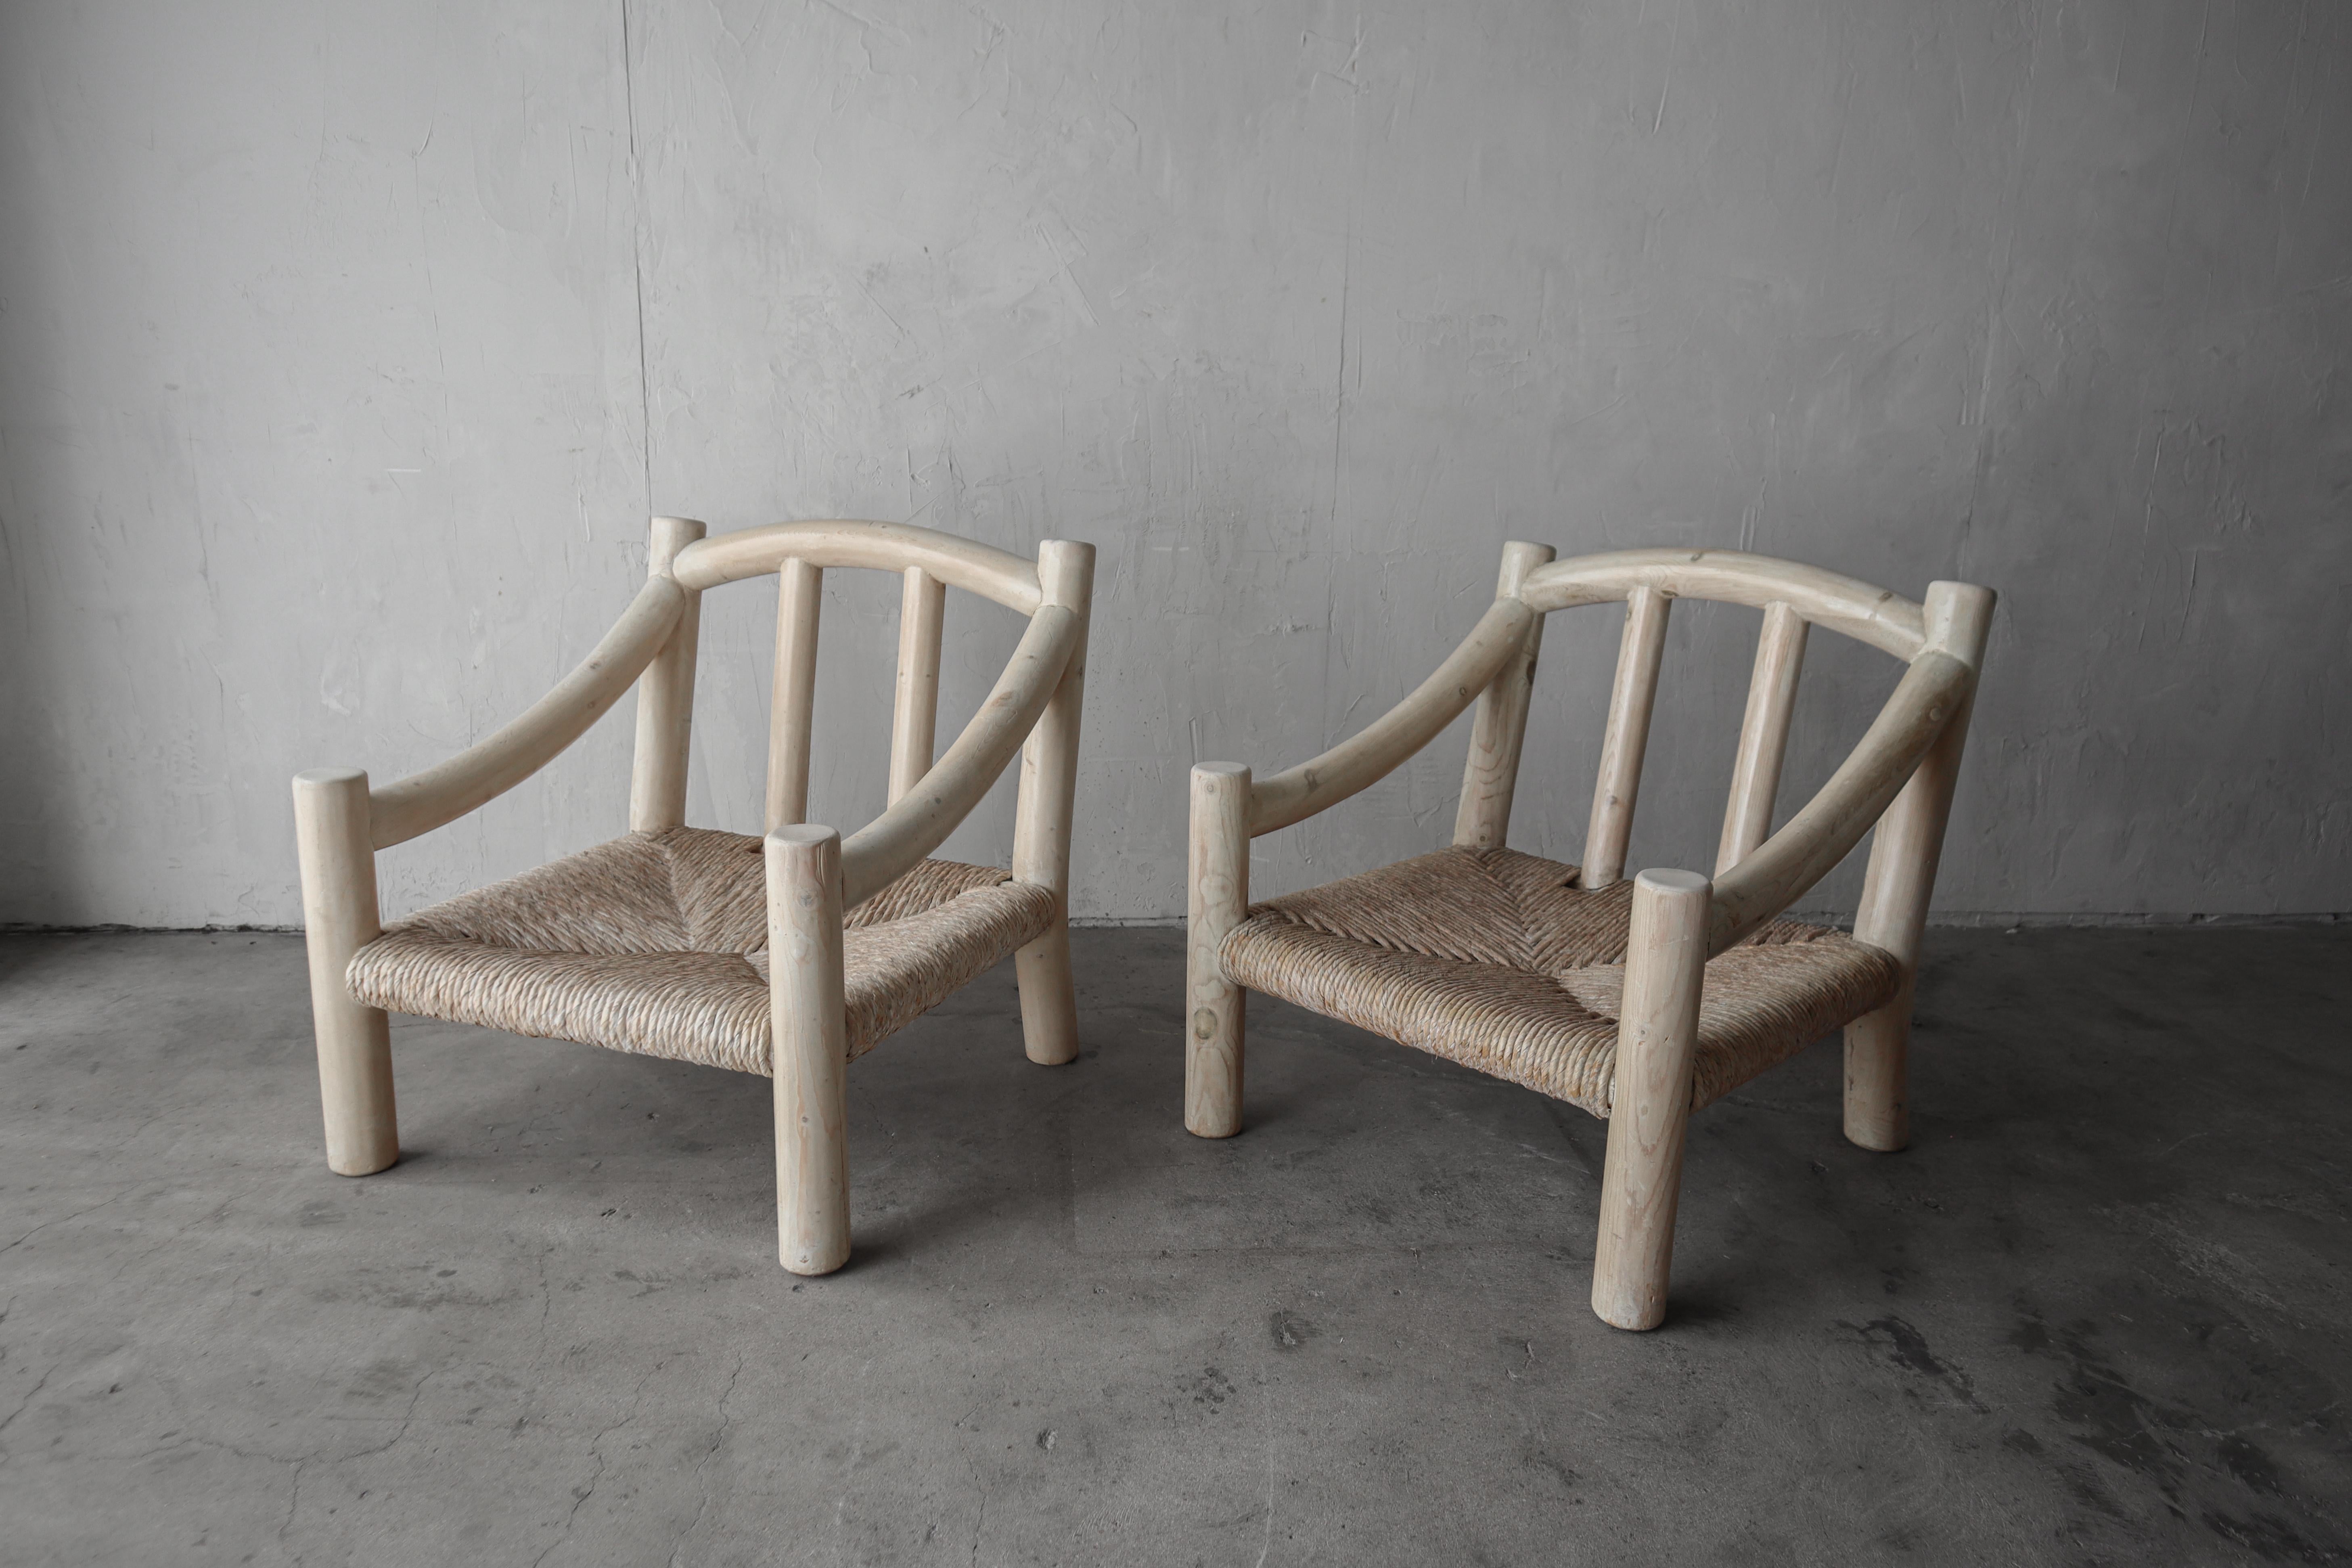 Pair of White Washed Pine Lounge Chairs by Michael Taylor 1